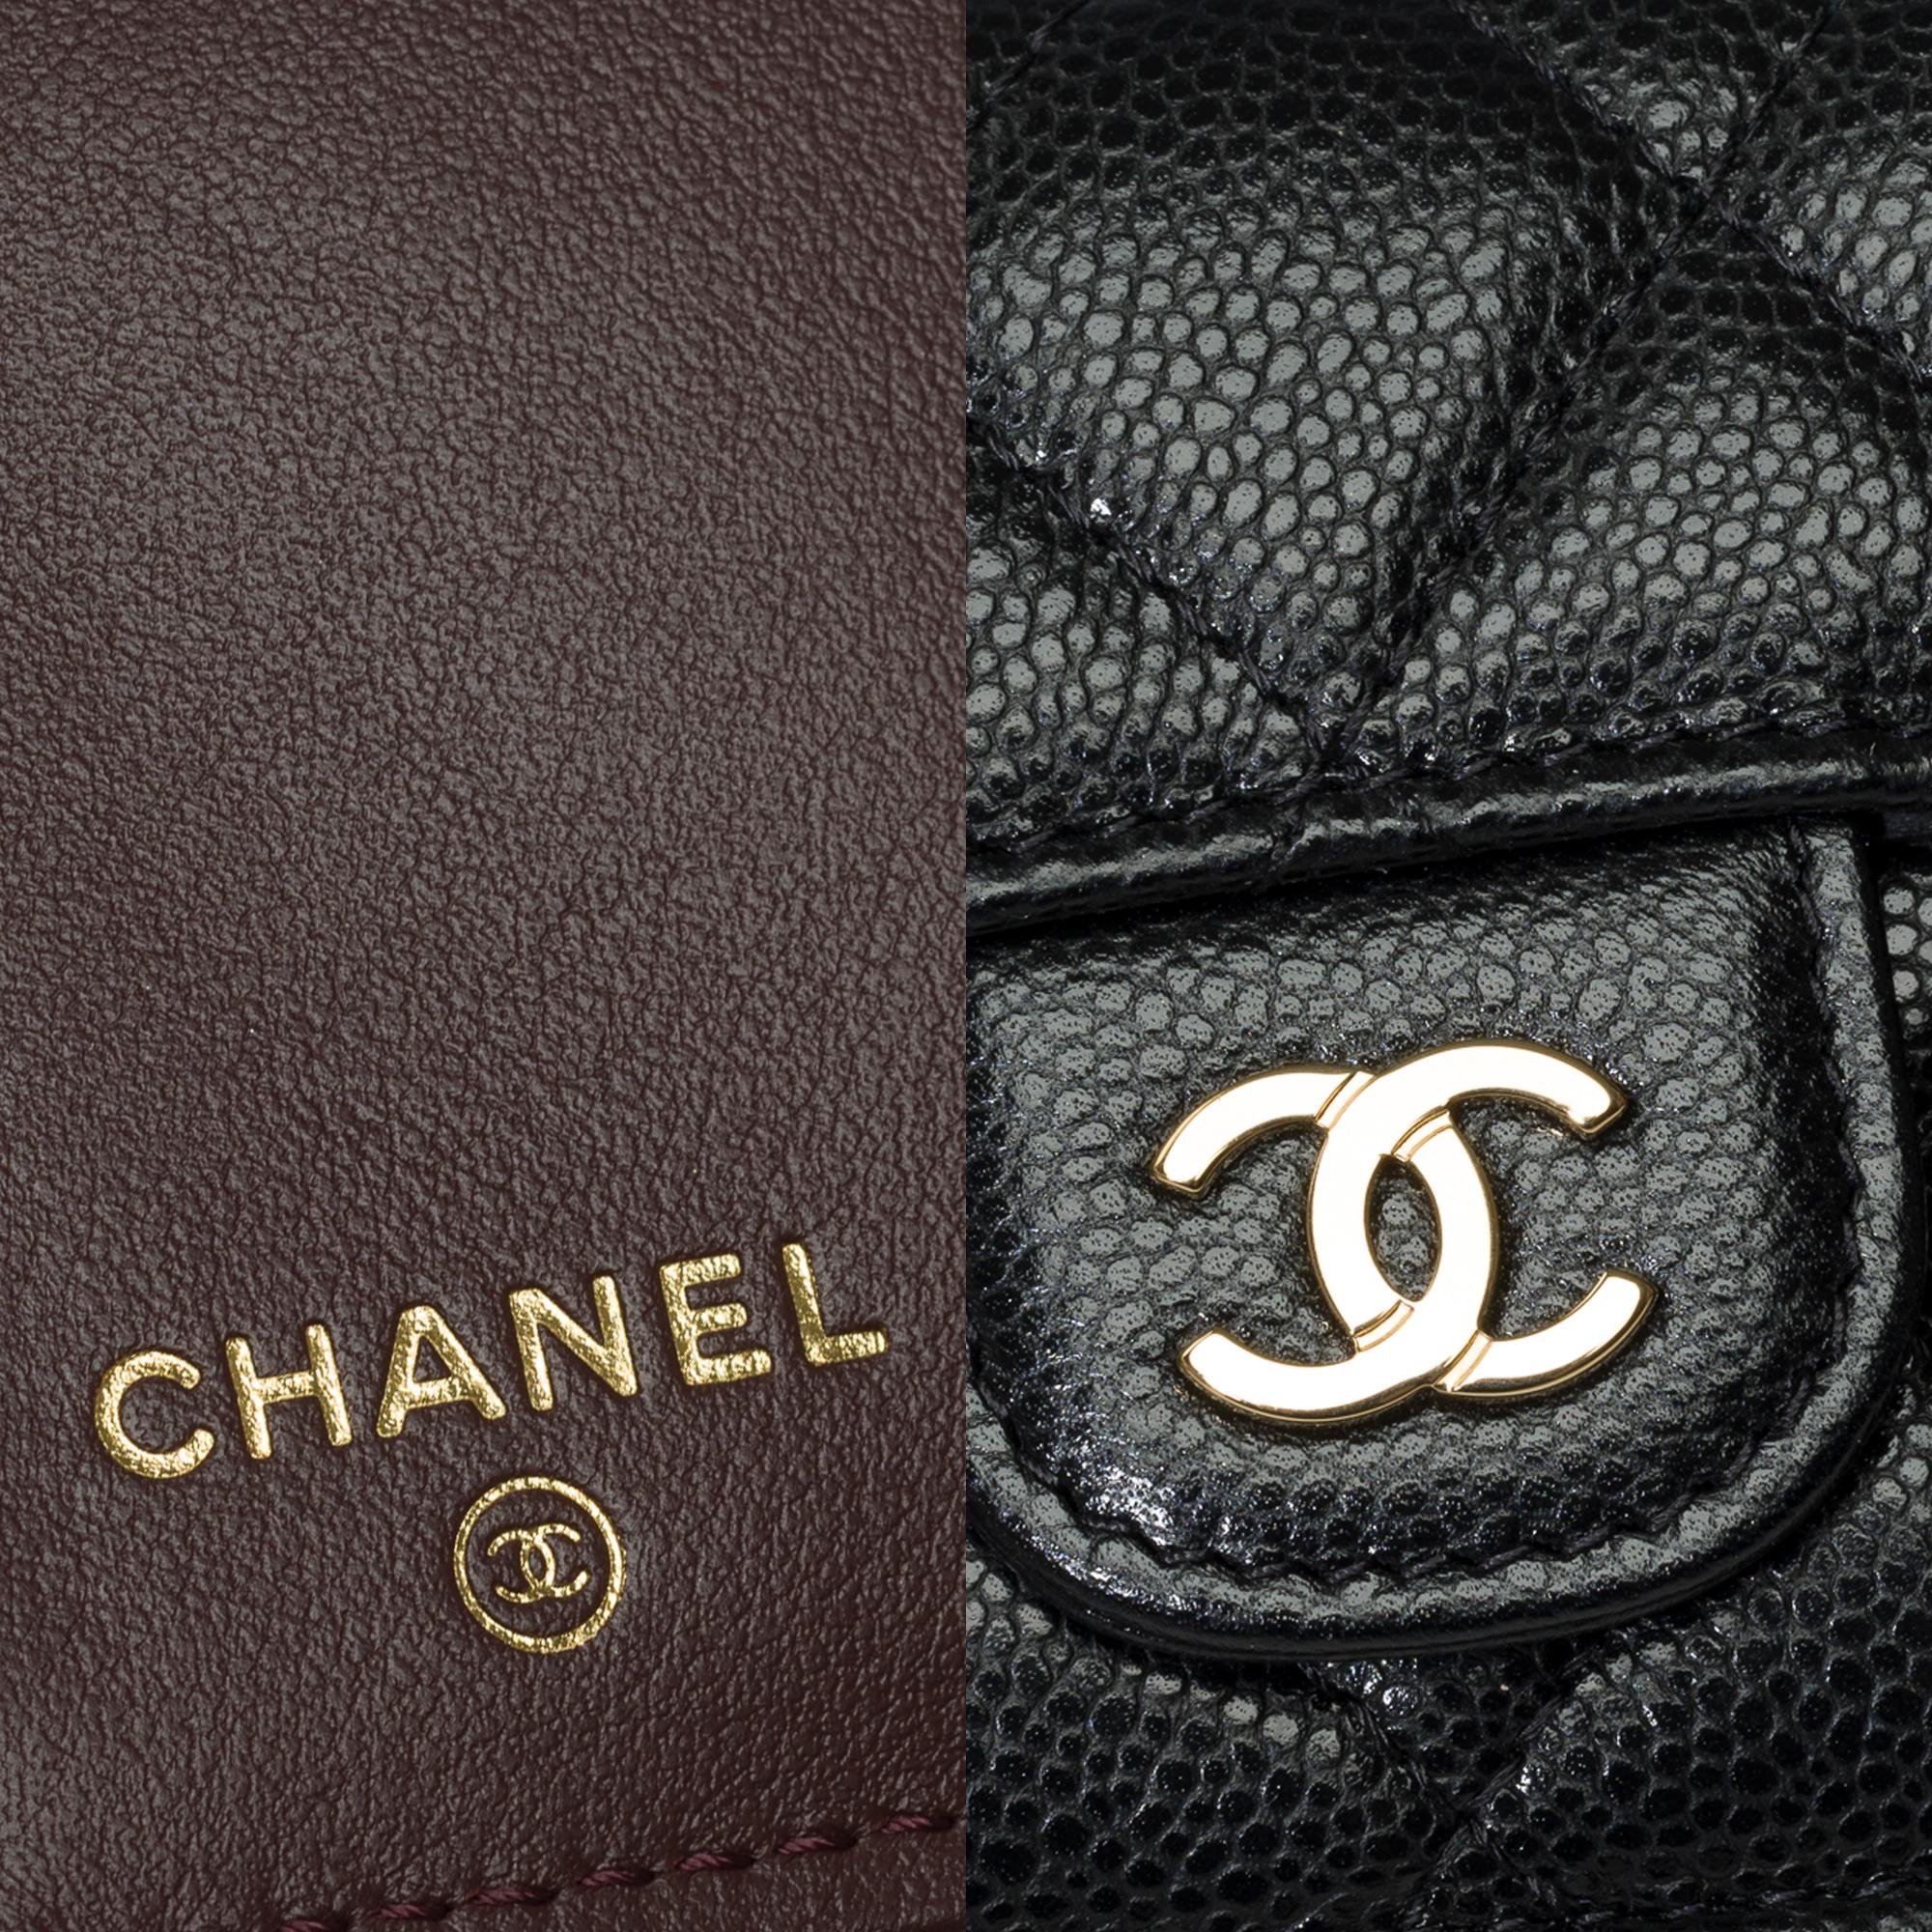 Gorgeous Chanel Wallet  in black Caviar quilted leather, GHW 3